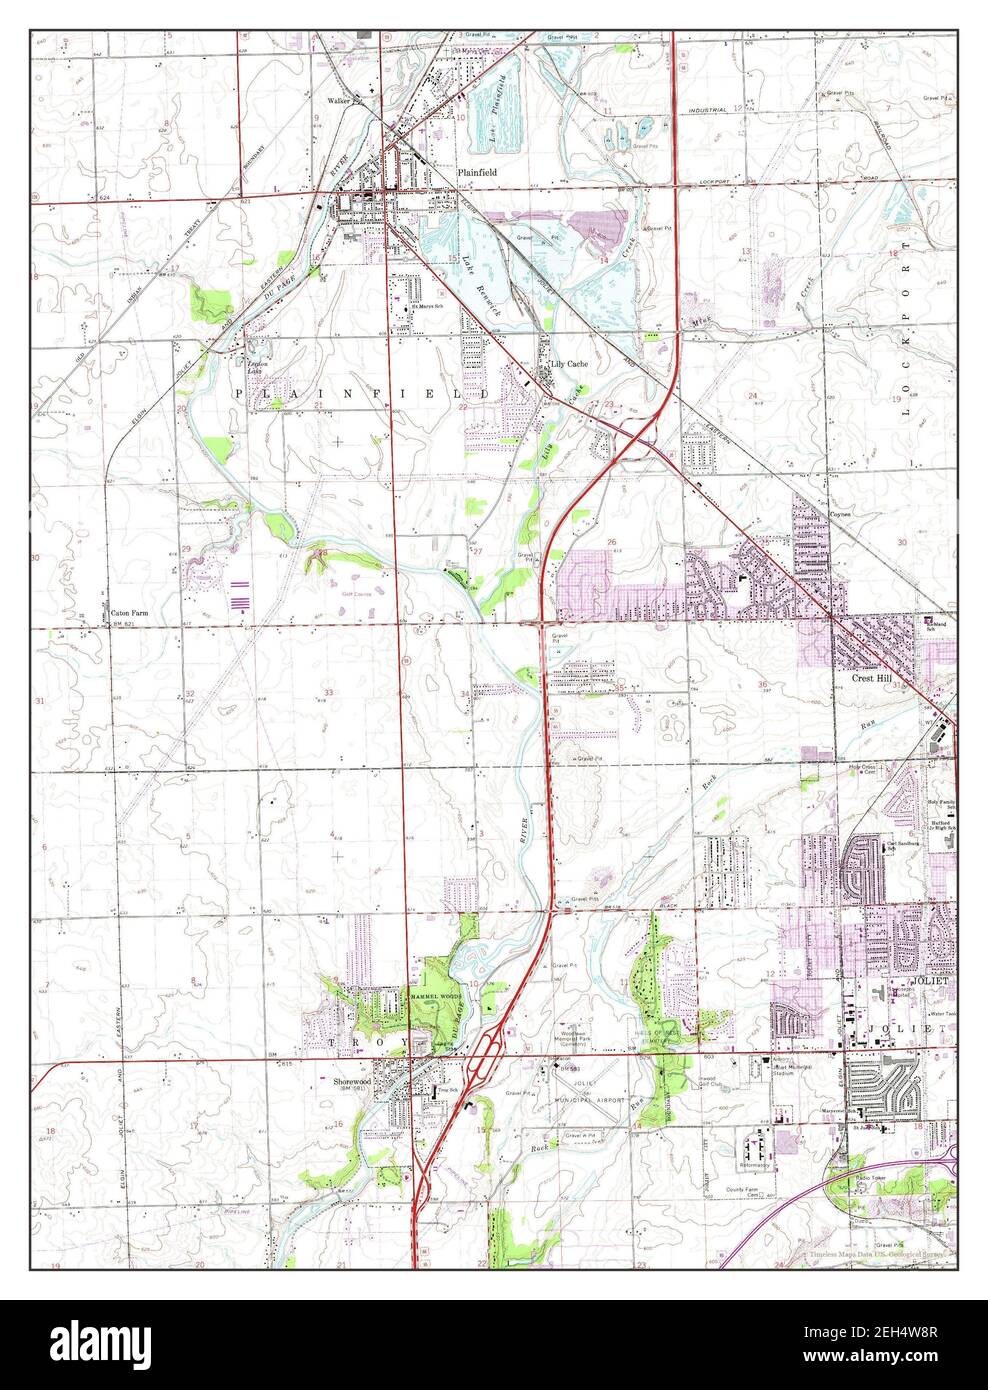 Plainfield Illinois Map 1962 124000 United States Of America By Timeless Maps Data Us Geological Survey 2EH4W8R 